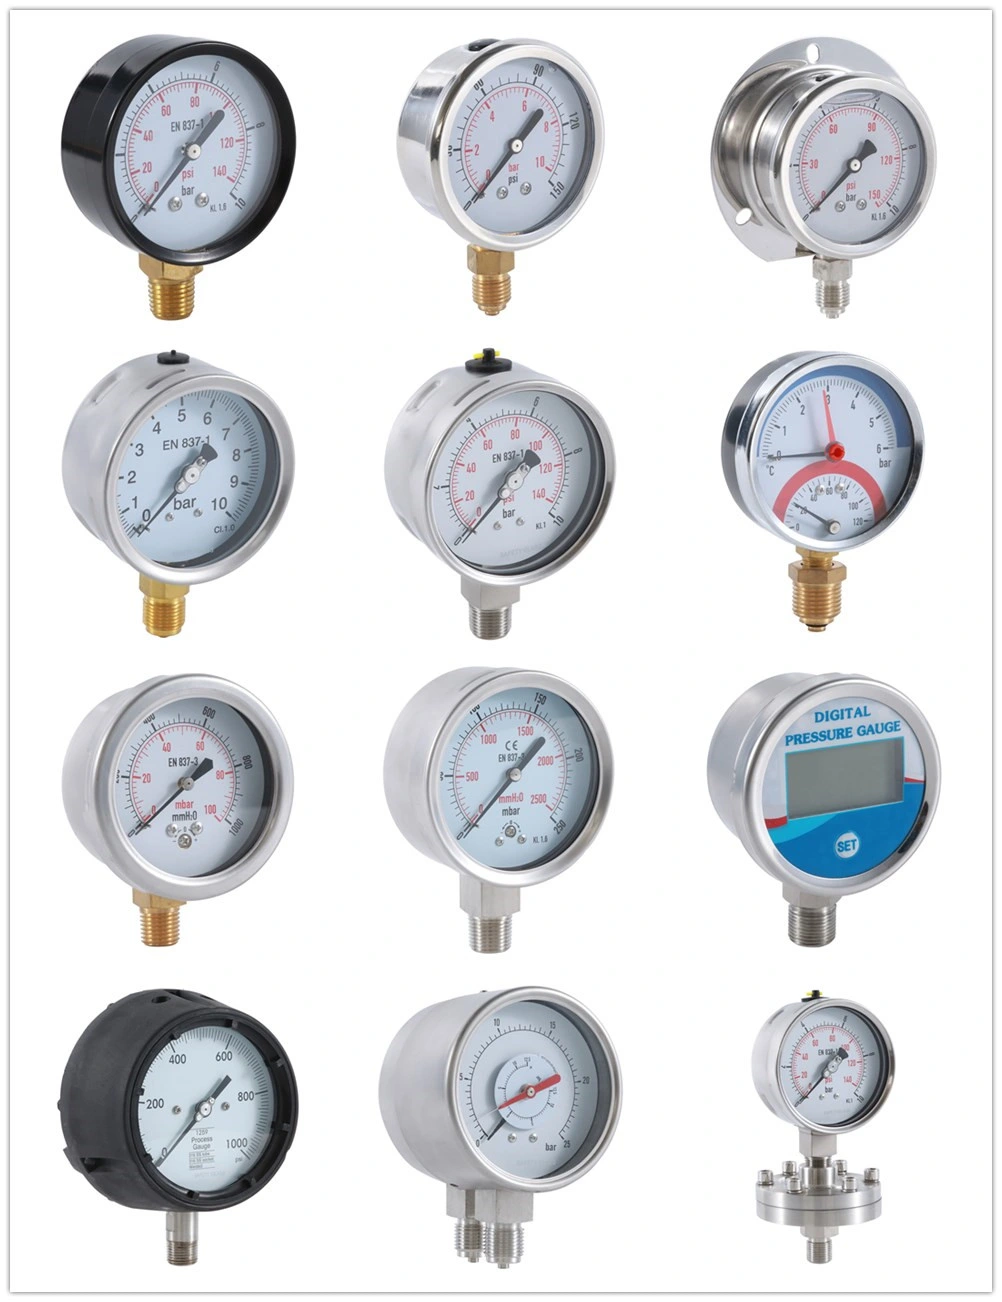 120c Water Thermometer-Hot Water Thermometer-Steam Boiler Temperature Gauge